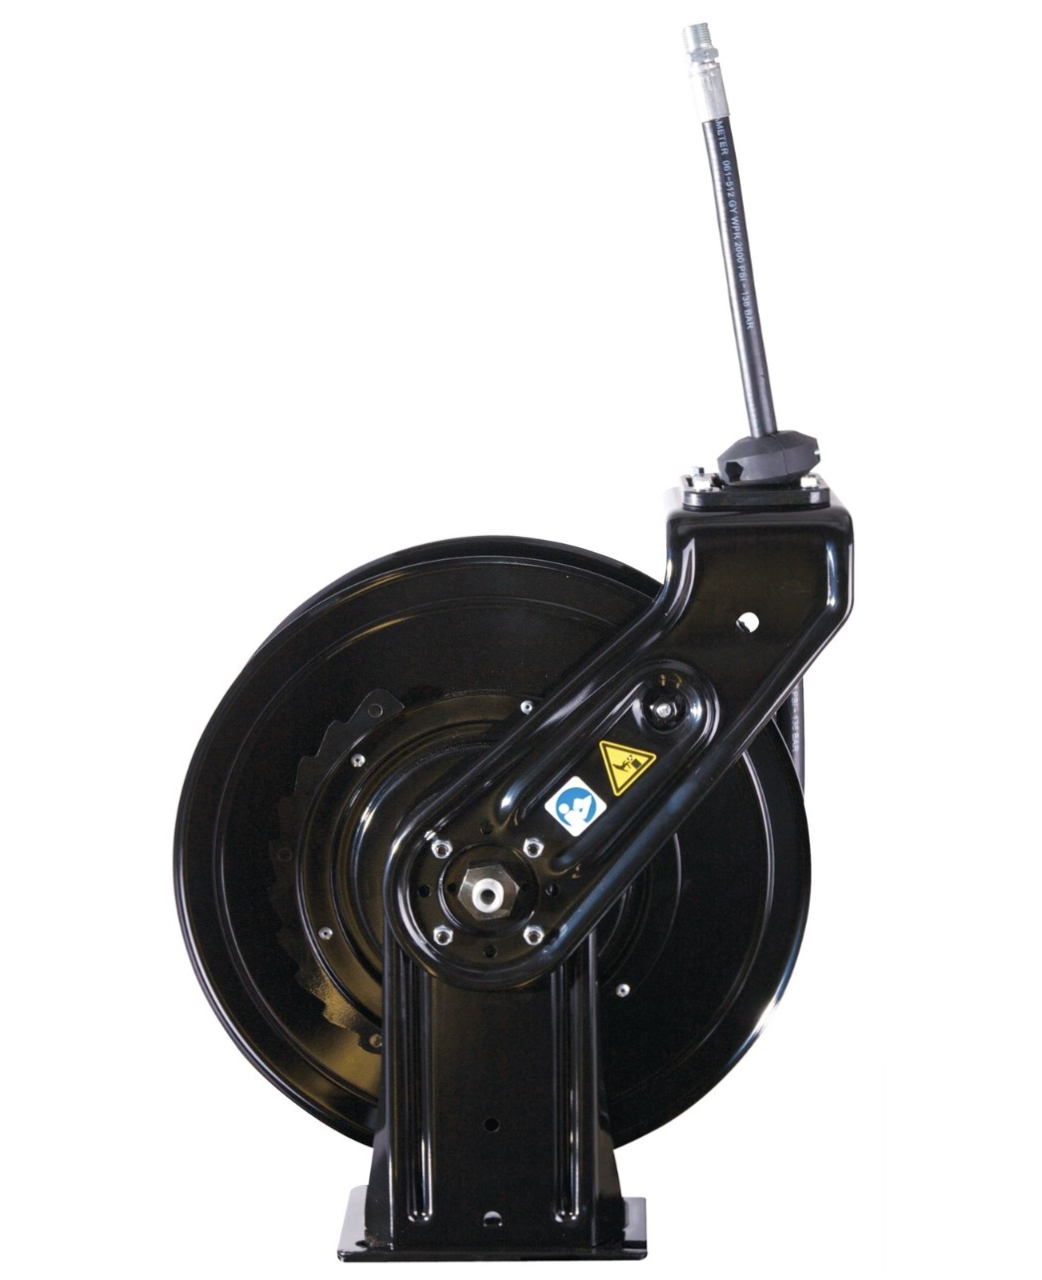 Graco SD20 Series Hose Reel w/ 3/8 in. X 50 ft. Hose - Grease - Truck/Bench Mount Black